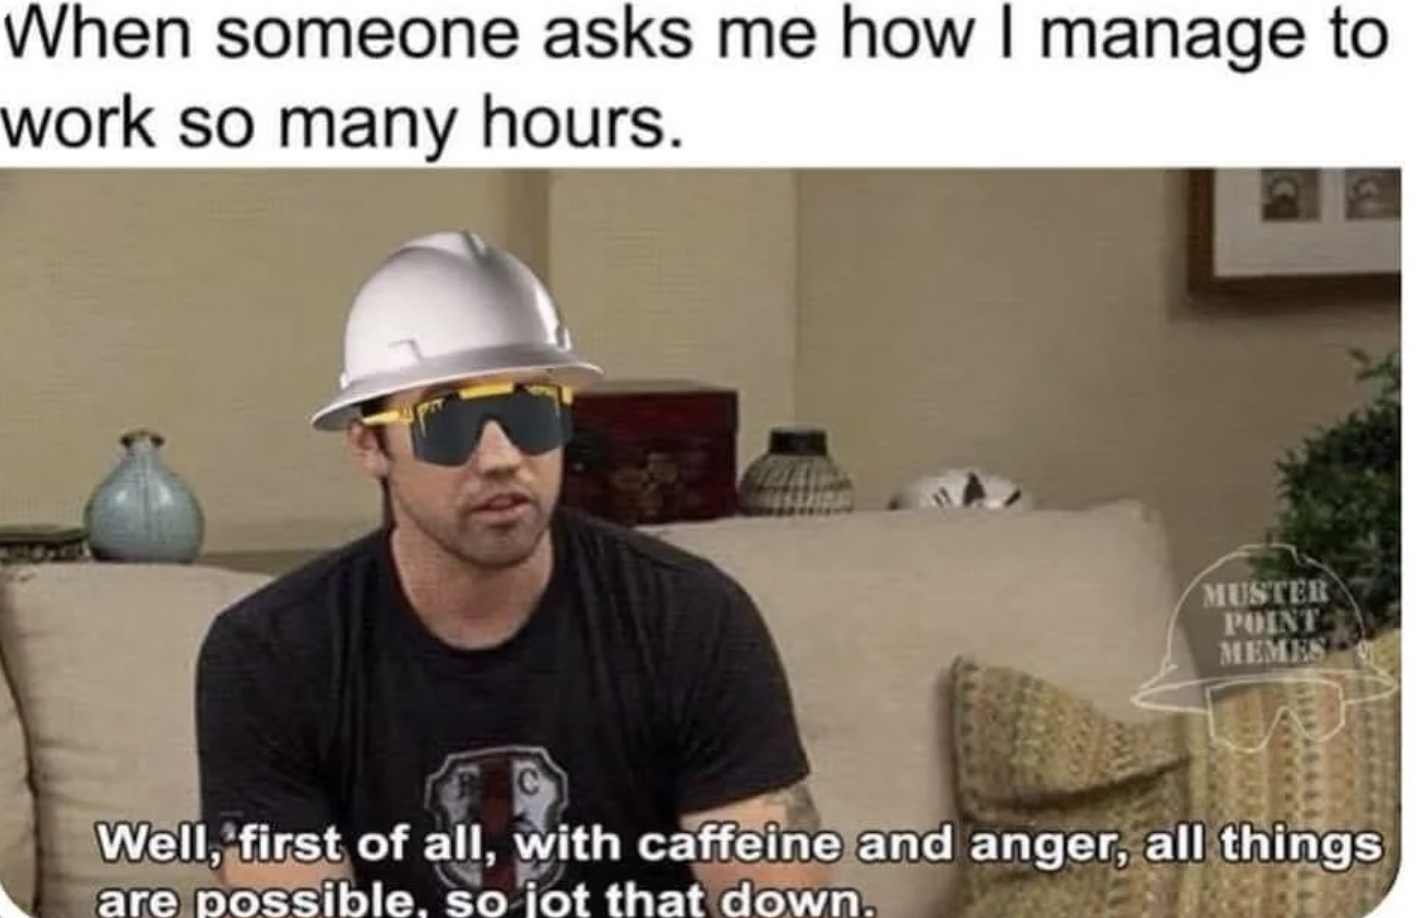 caffeine and anger all things are possible - When someone asks me how I manage to work so many hours. Muster Point Memes Well, first of all, with caffeine and anger, all things are possible, so jot that down.